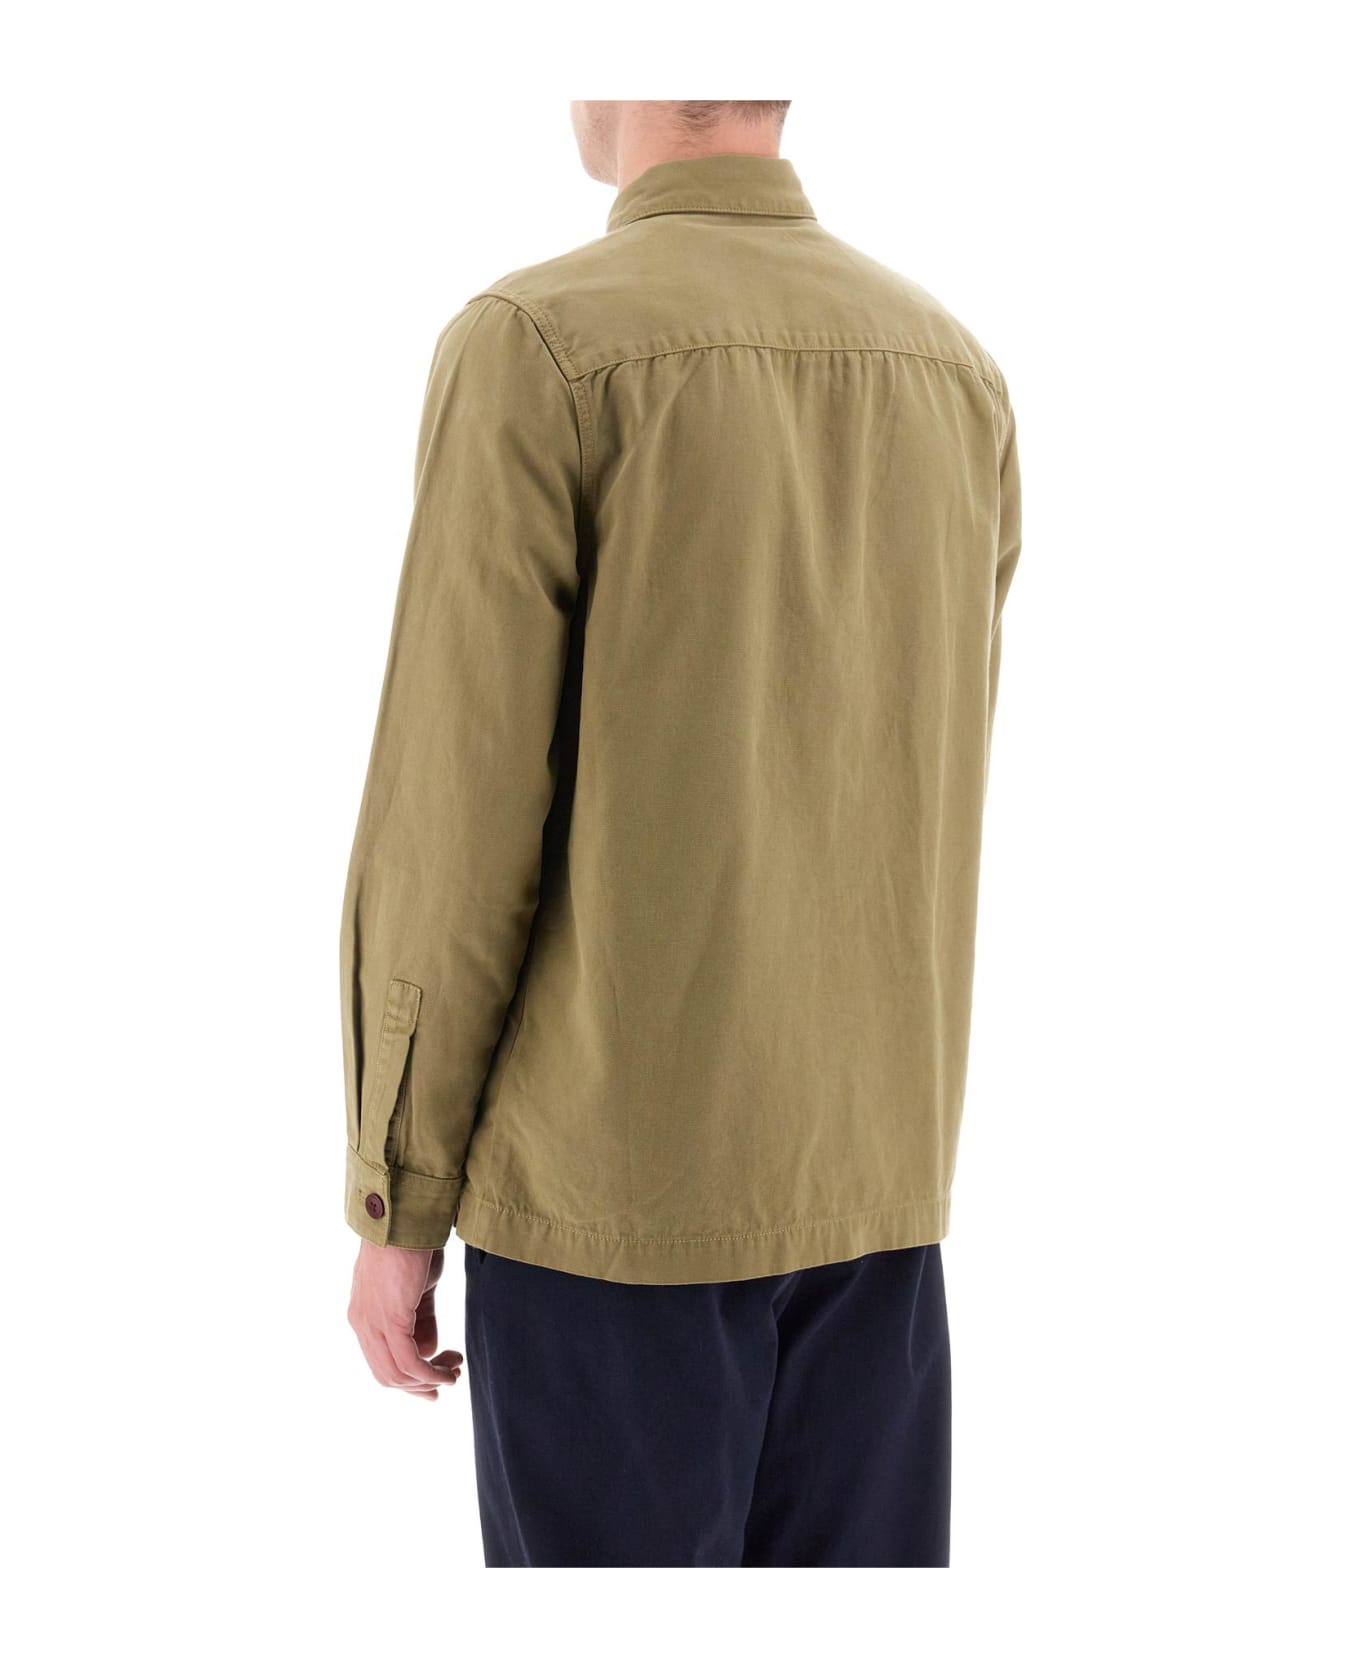 Barbour Green Cotton Shirt - BLEACHED OLIVE (Green)